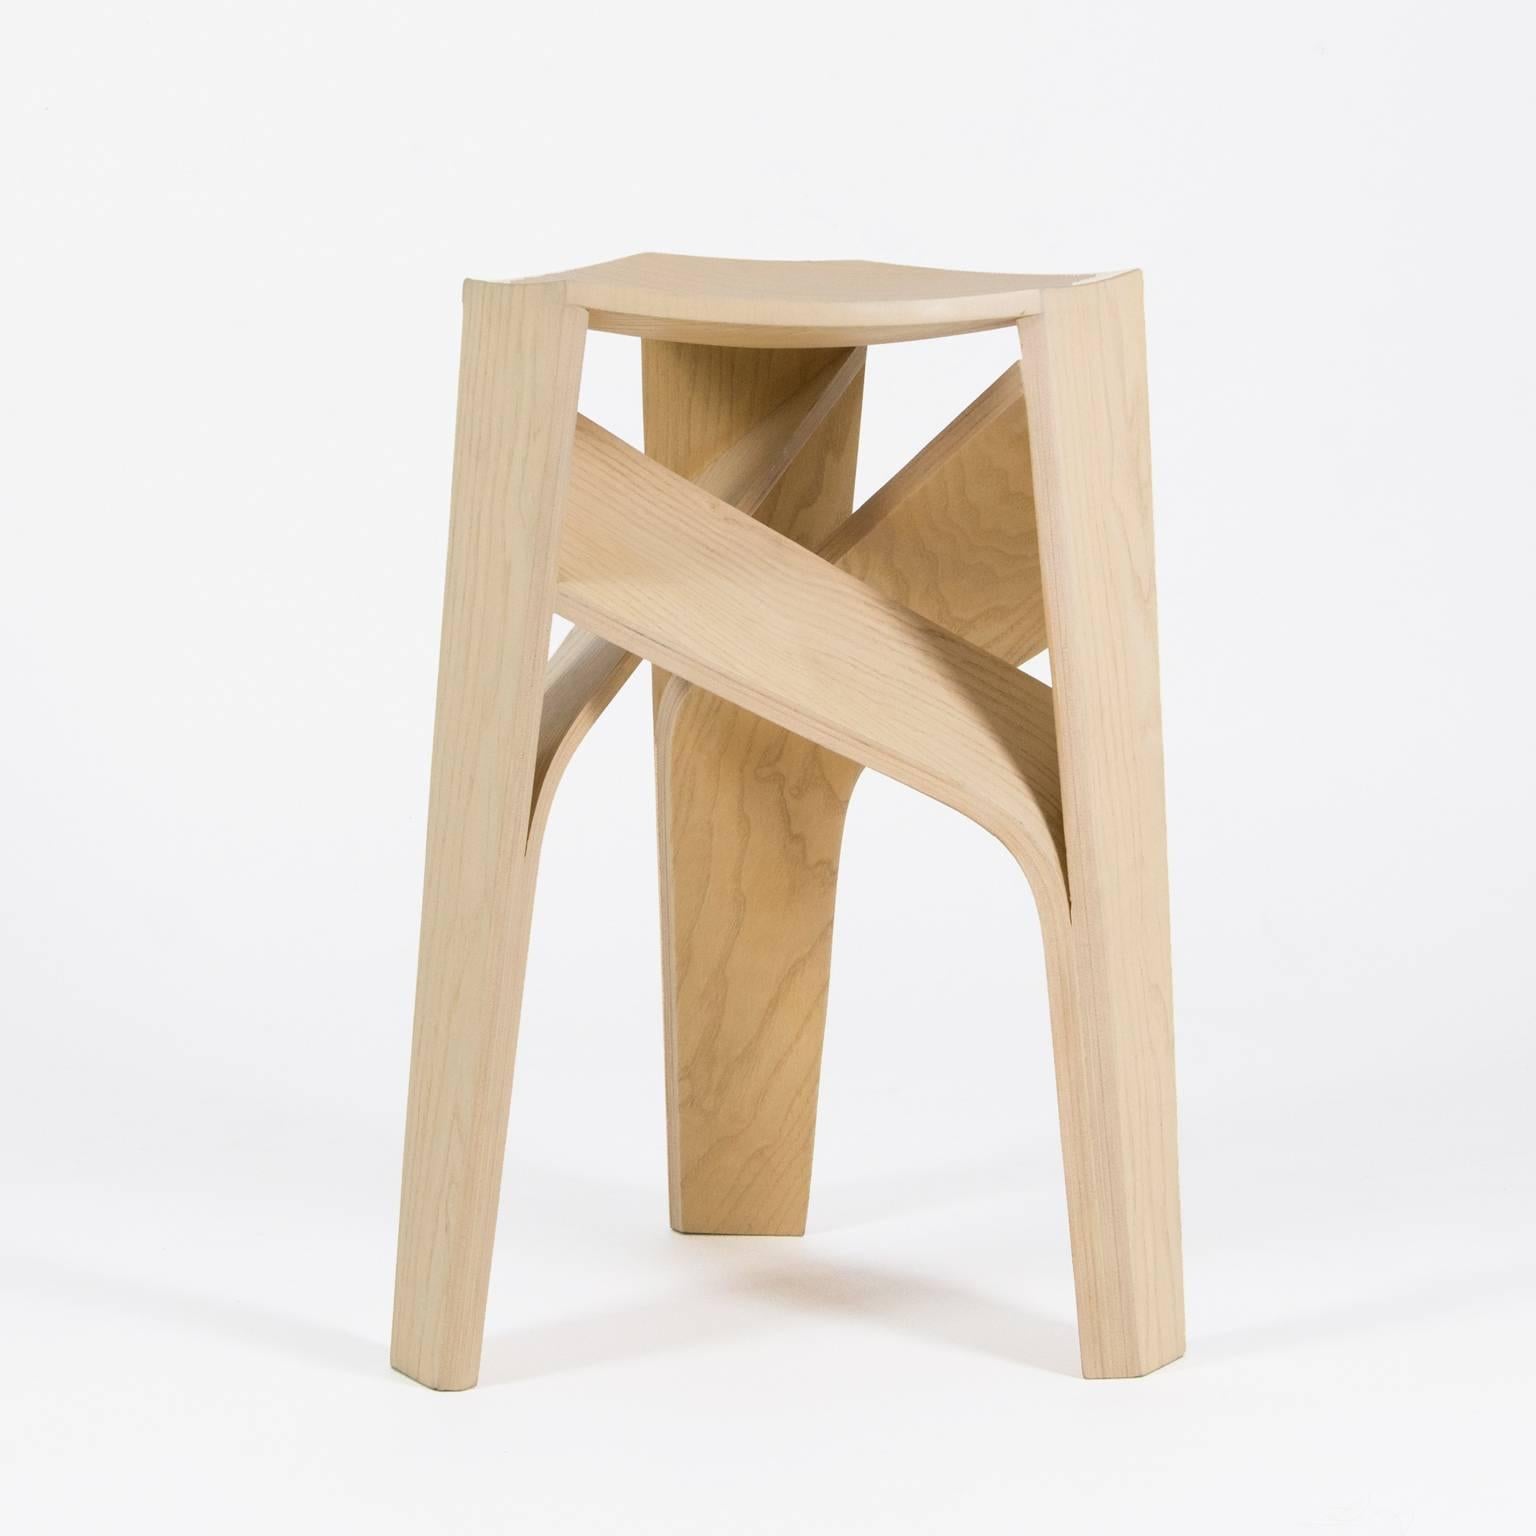 Aero stool is the result of mastering the process of bending wood, it features a geometrical intersection of its three legs, a technical feat achieved through meticulous digital and artisanal methods. The shape of Aero is an ingenious solution that